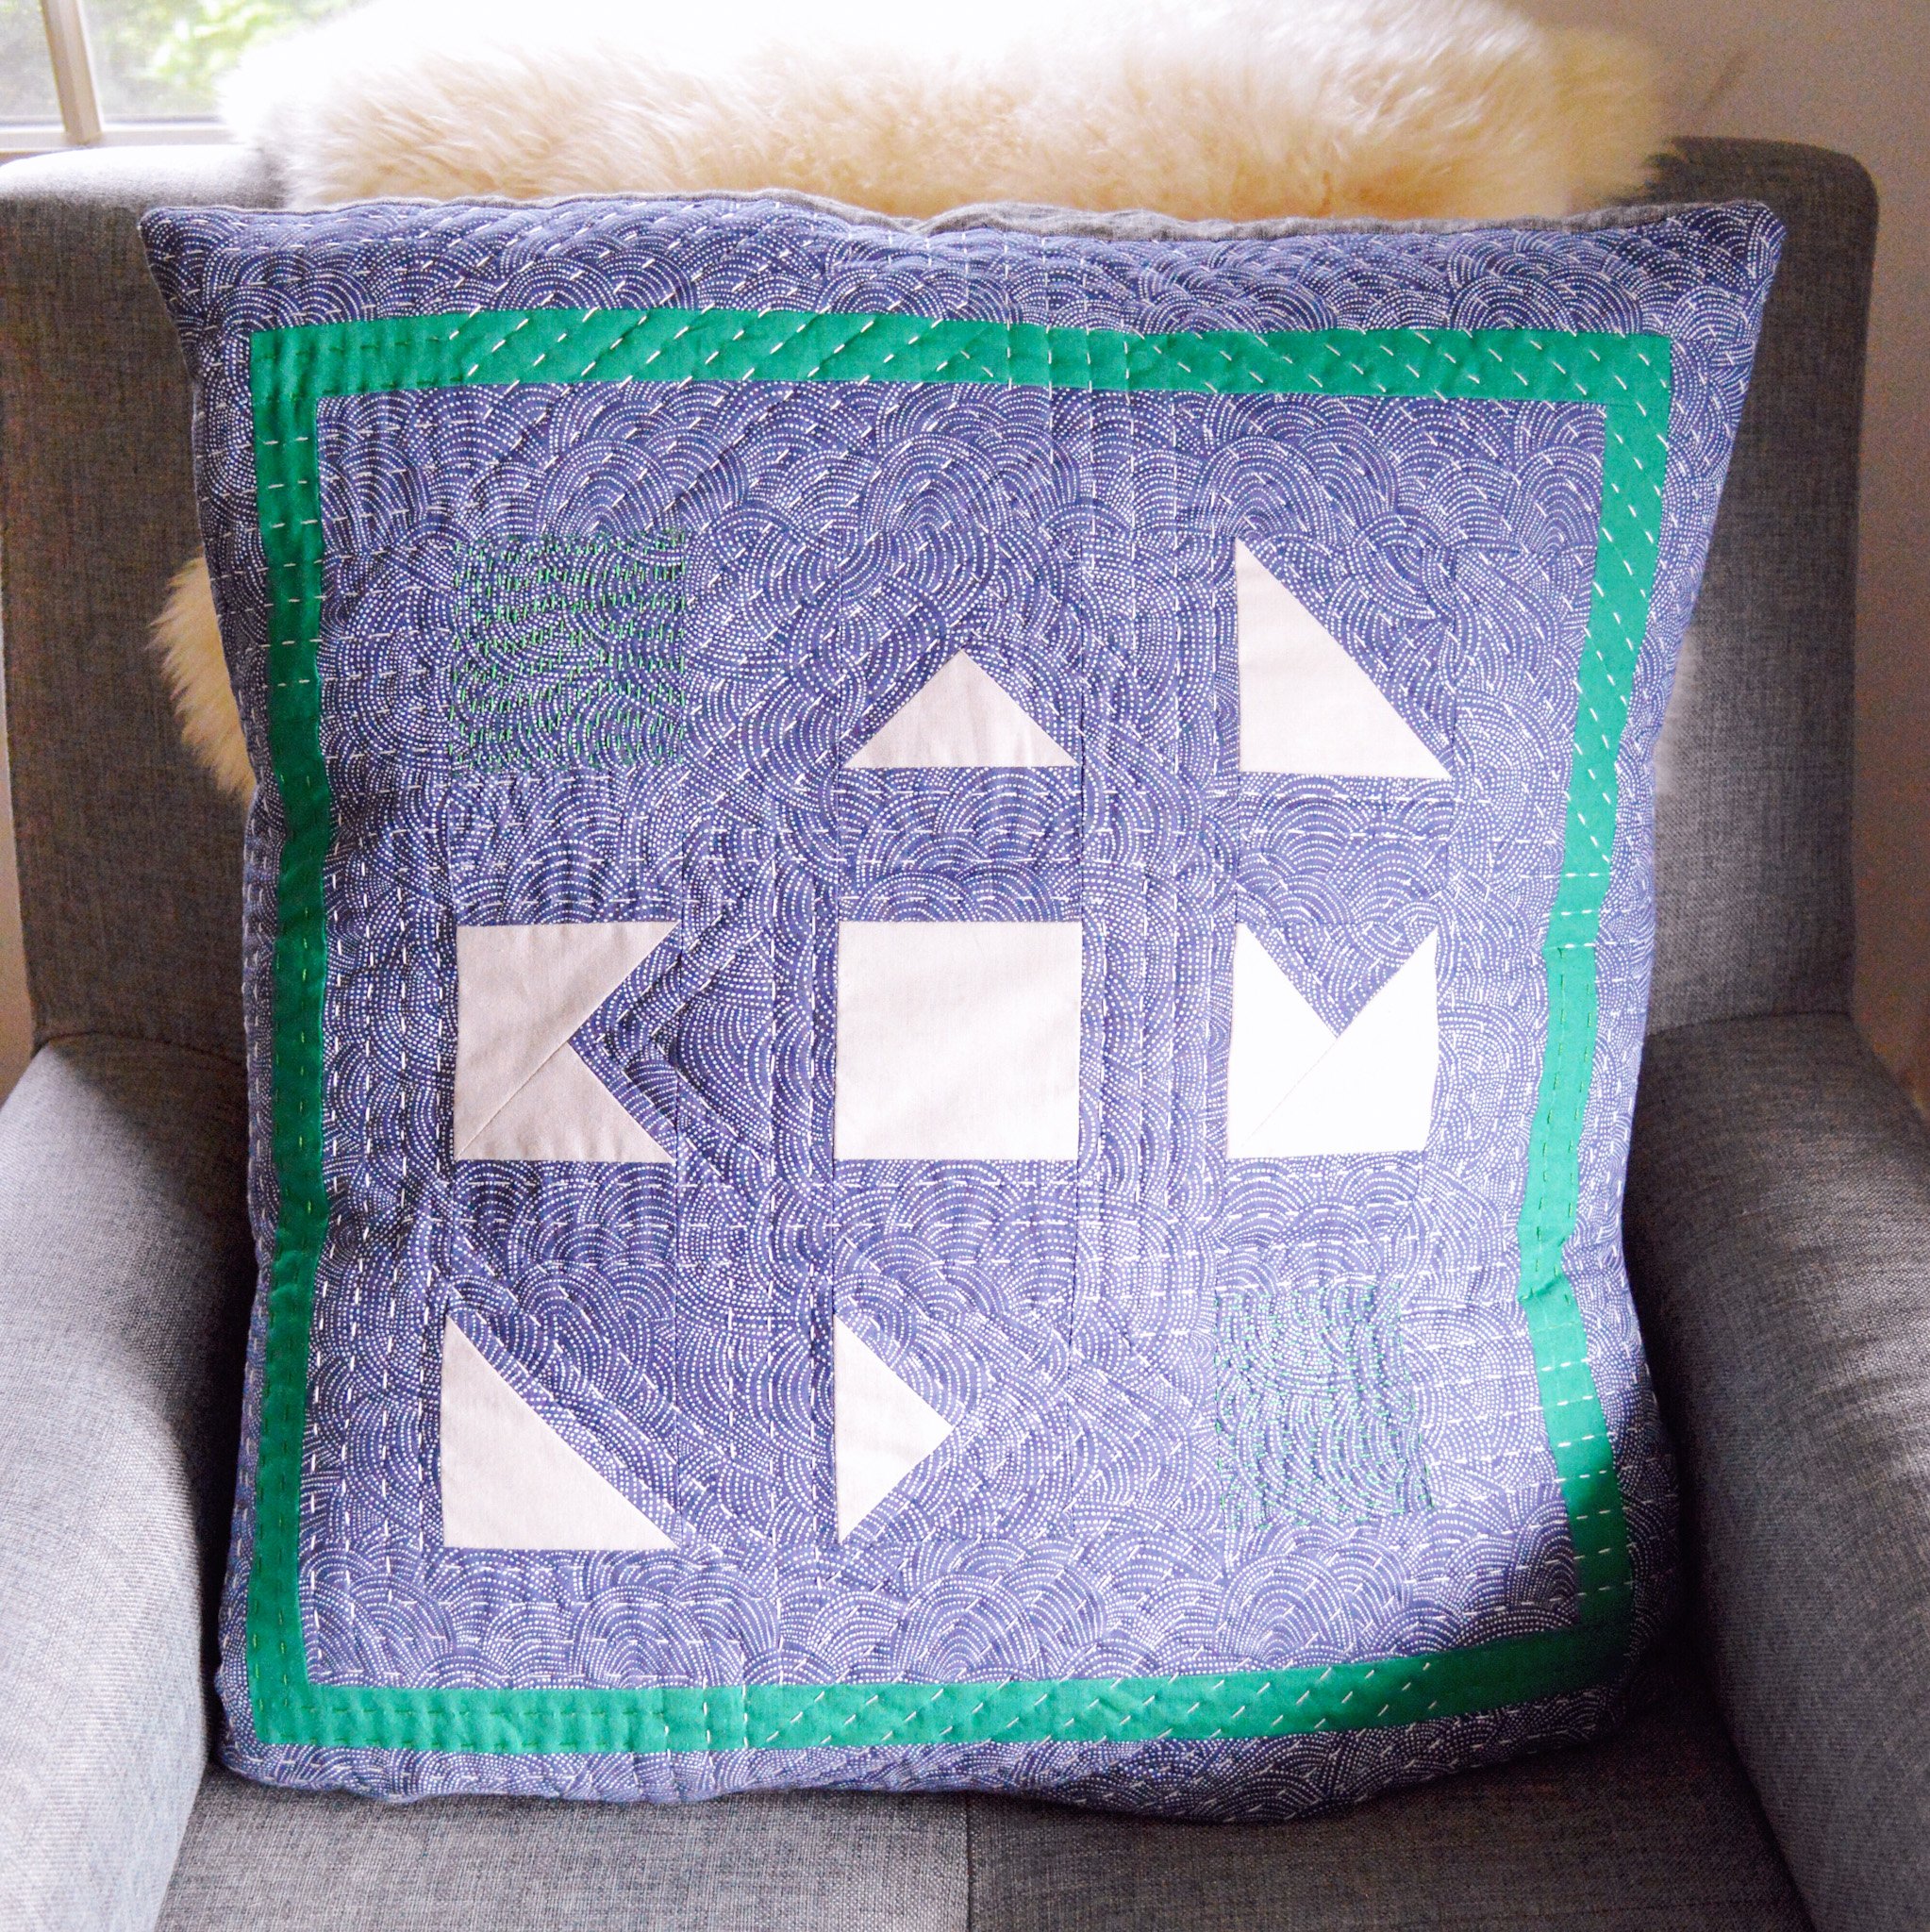  a hand quilted pillow that is blue with white geometric shapes and a green border 